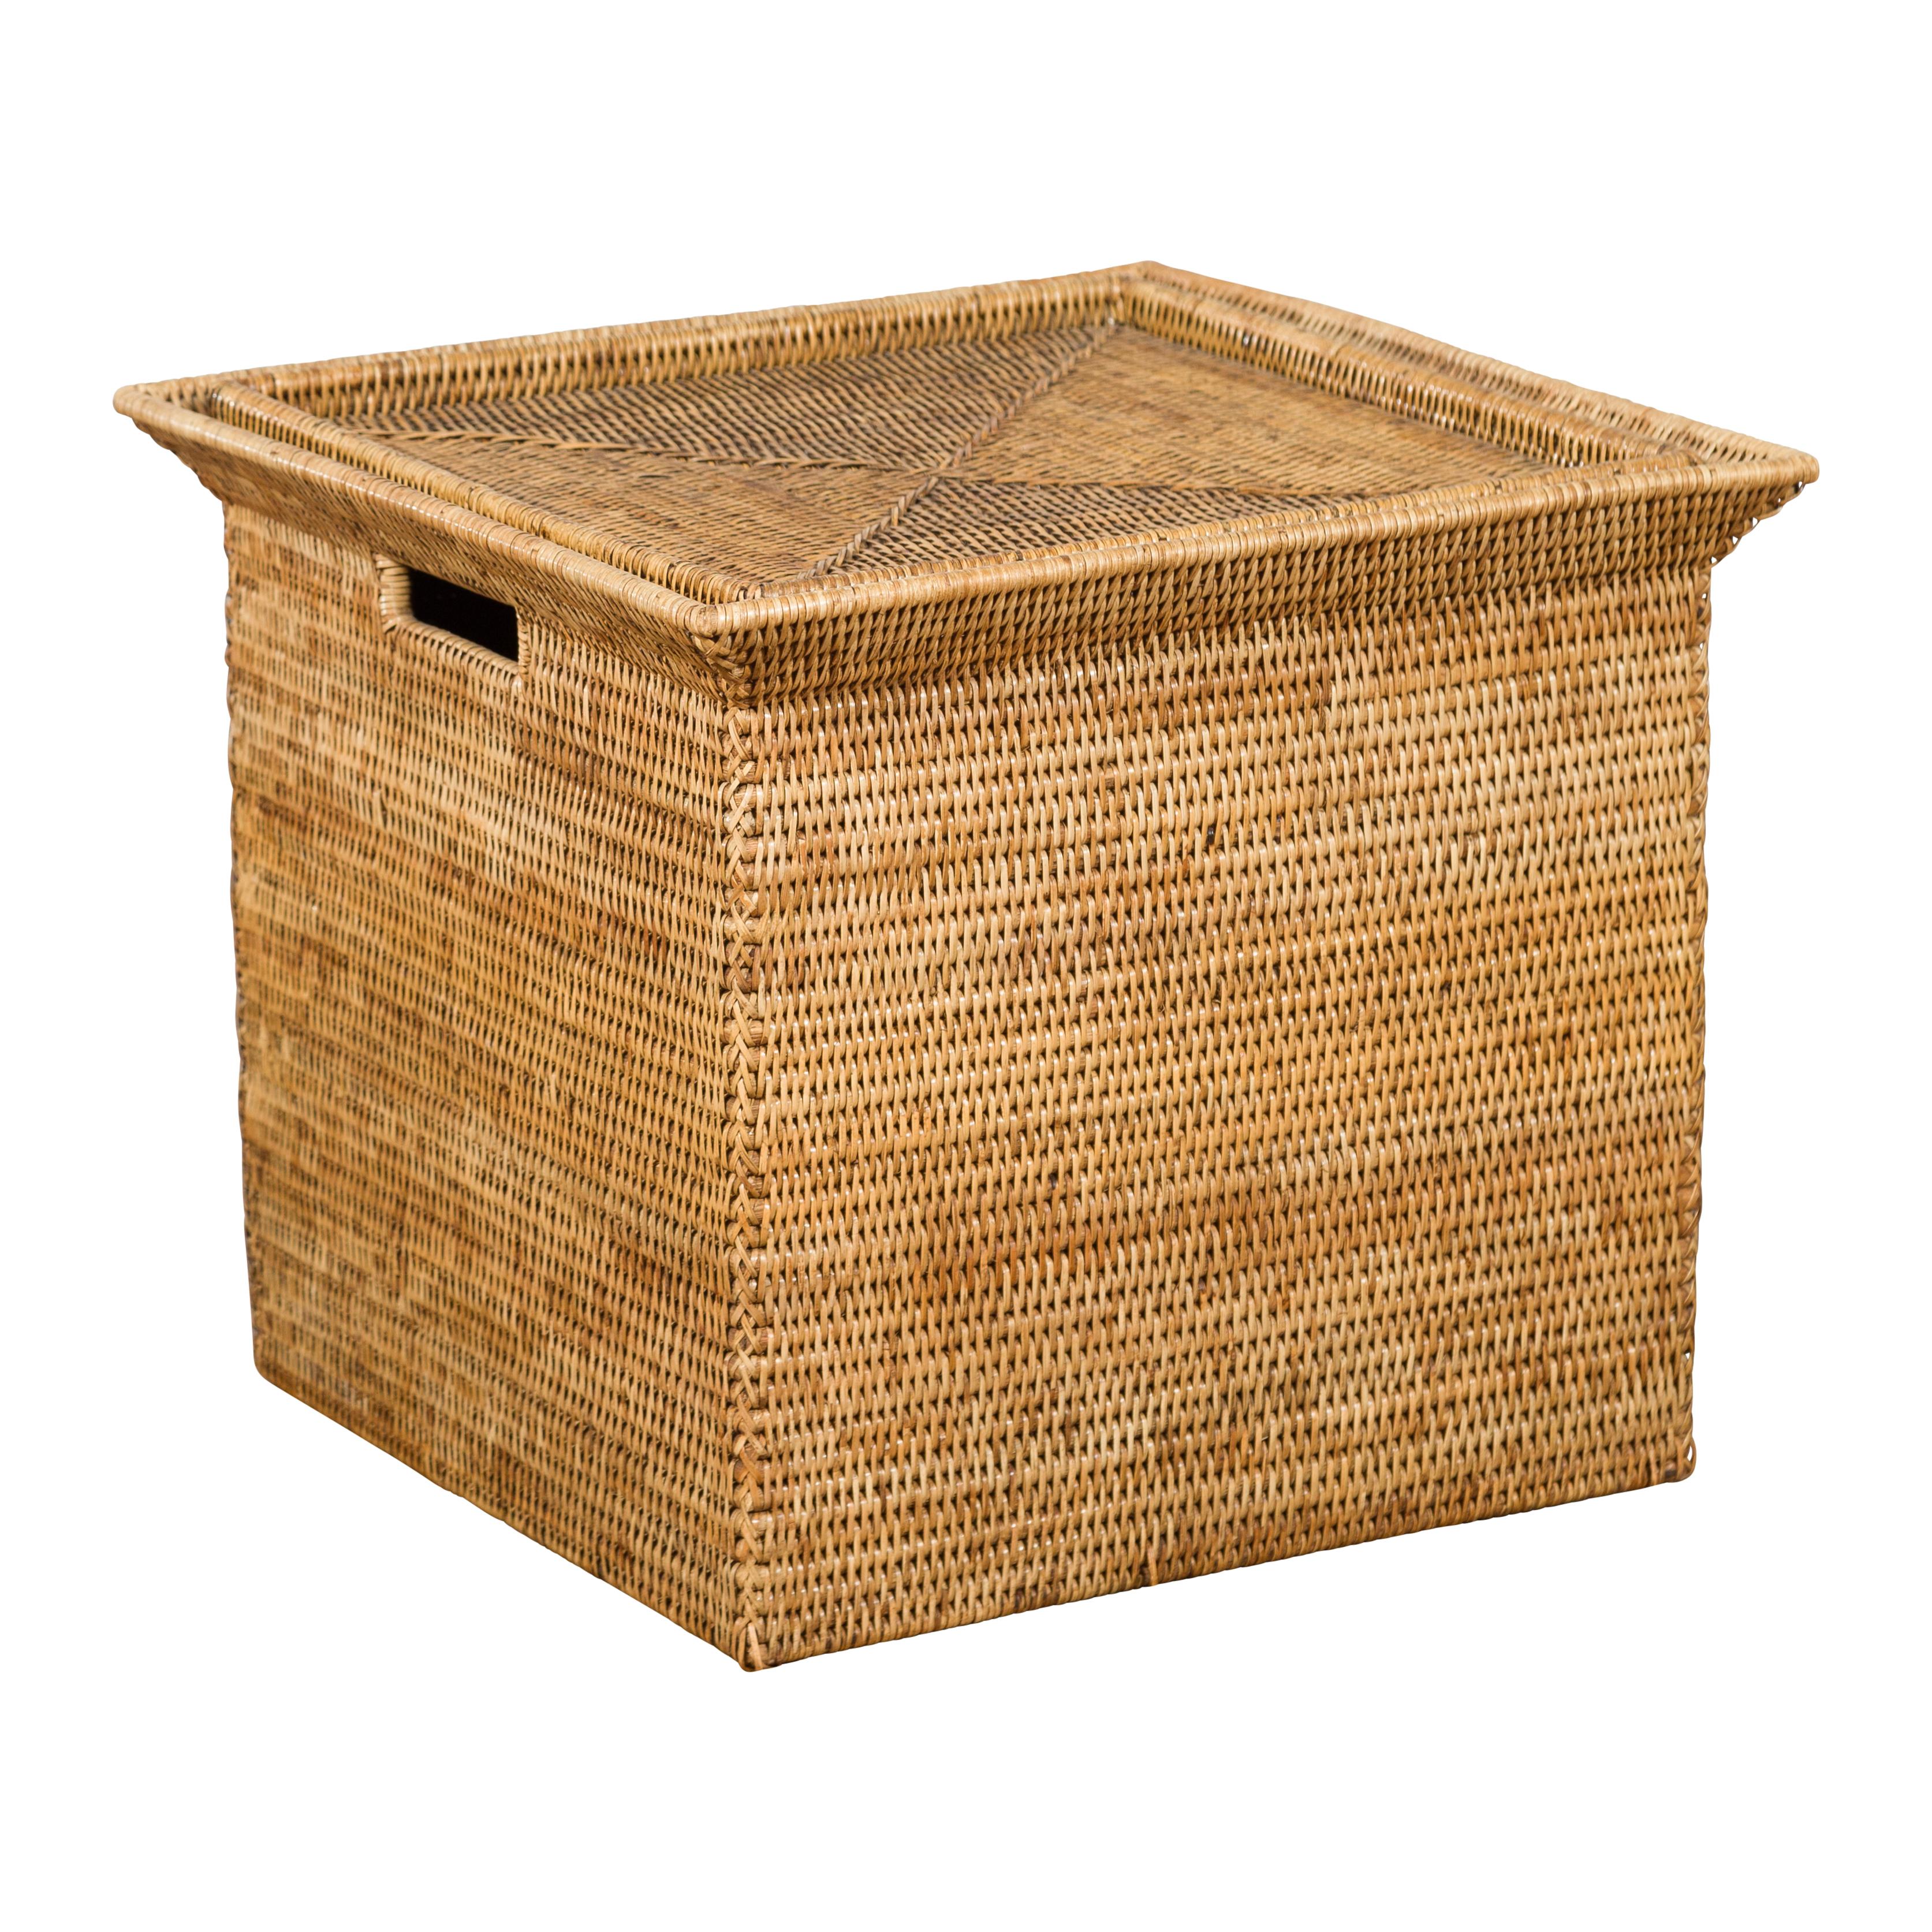 A vintage Chinese rattan storage box from the mid 20th century, with pierced handles. Created in China during the midcentury period, this rattan box features a beveled top securing a square lid with triangular patterns. Pierced with handles on two